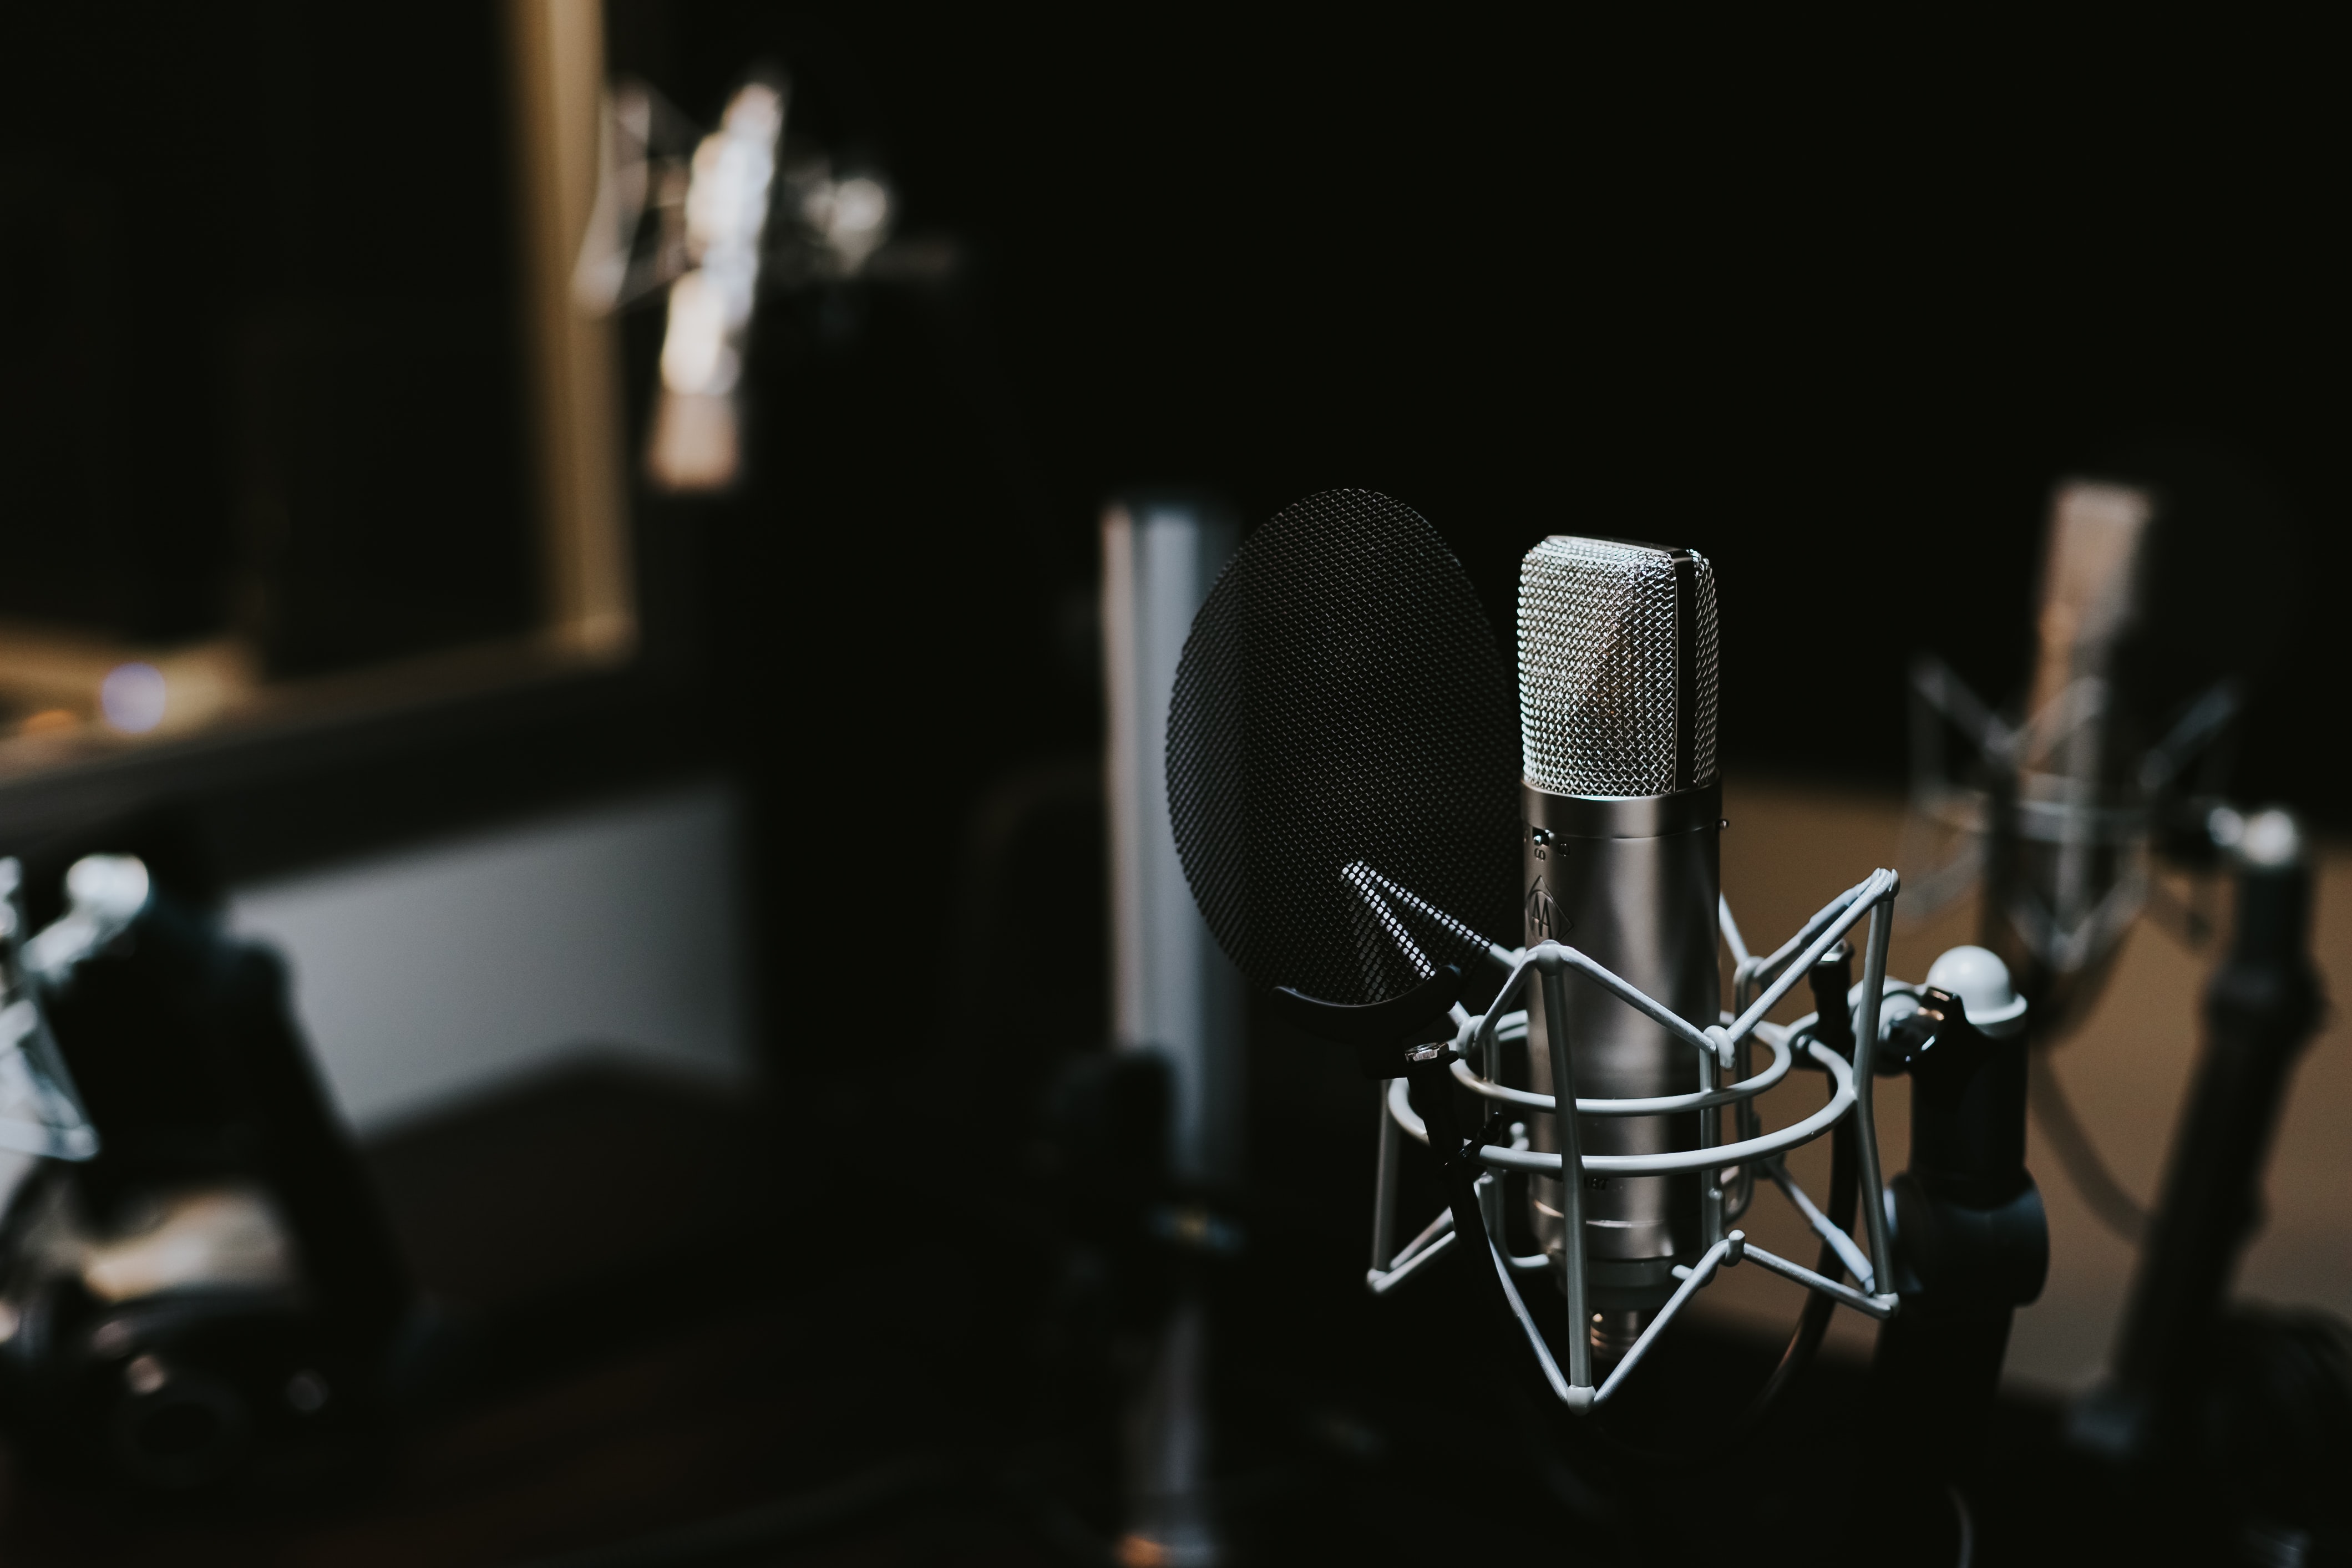 dark image of podcasting equipment and microphone